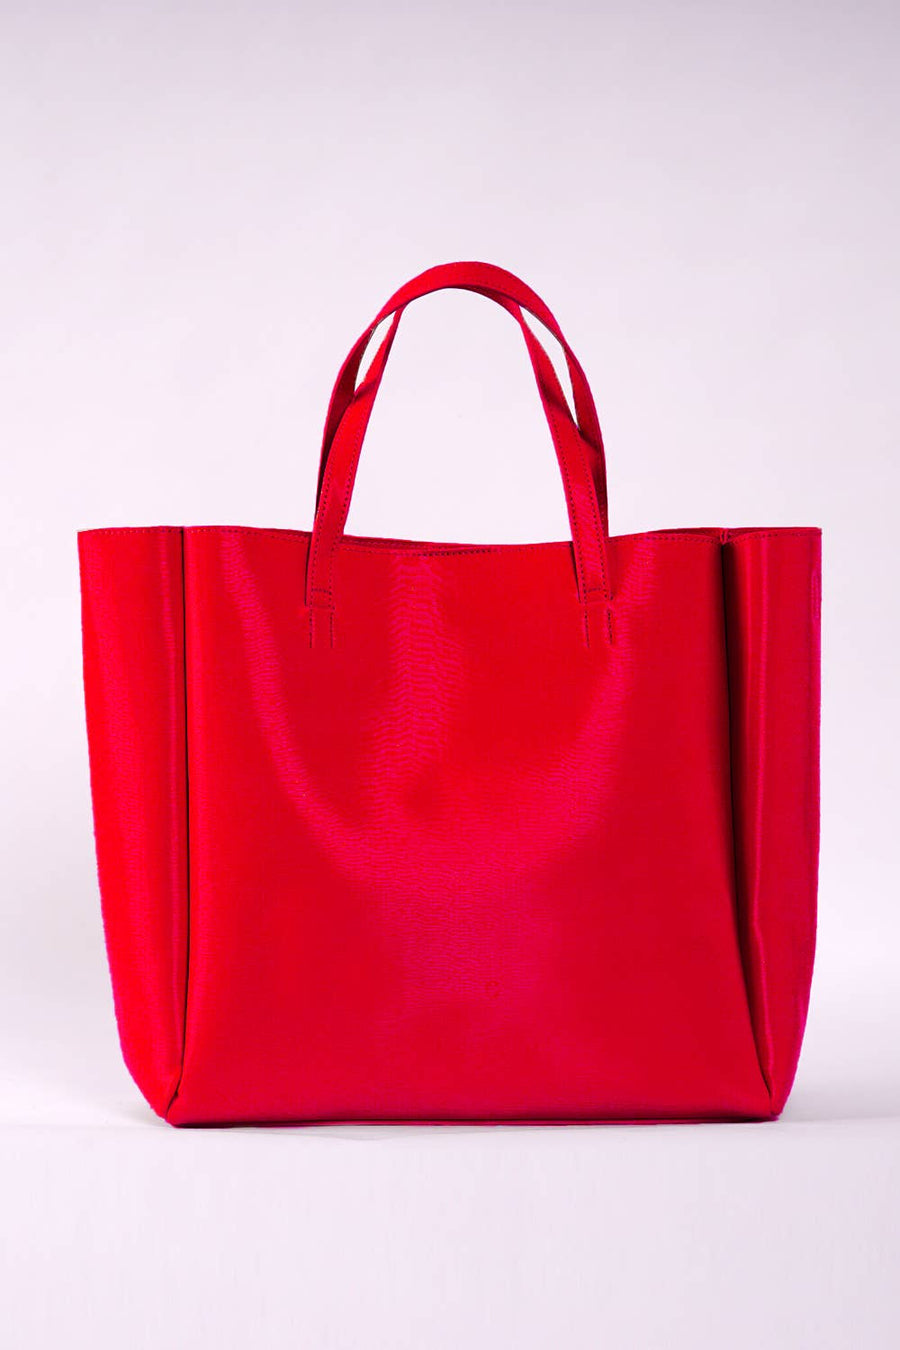 NEVER FULL TOTE - Solid (Red)